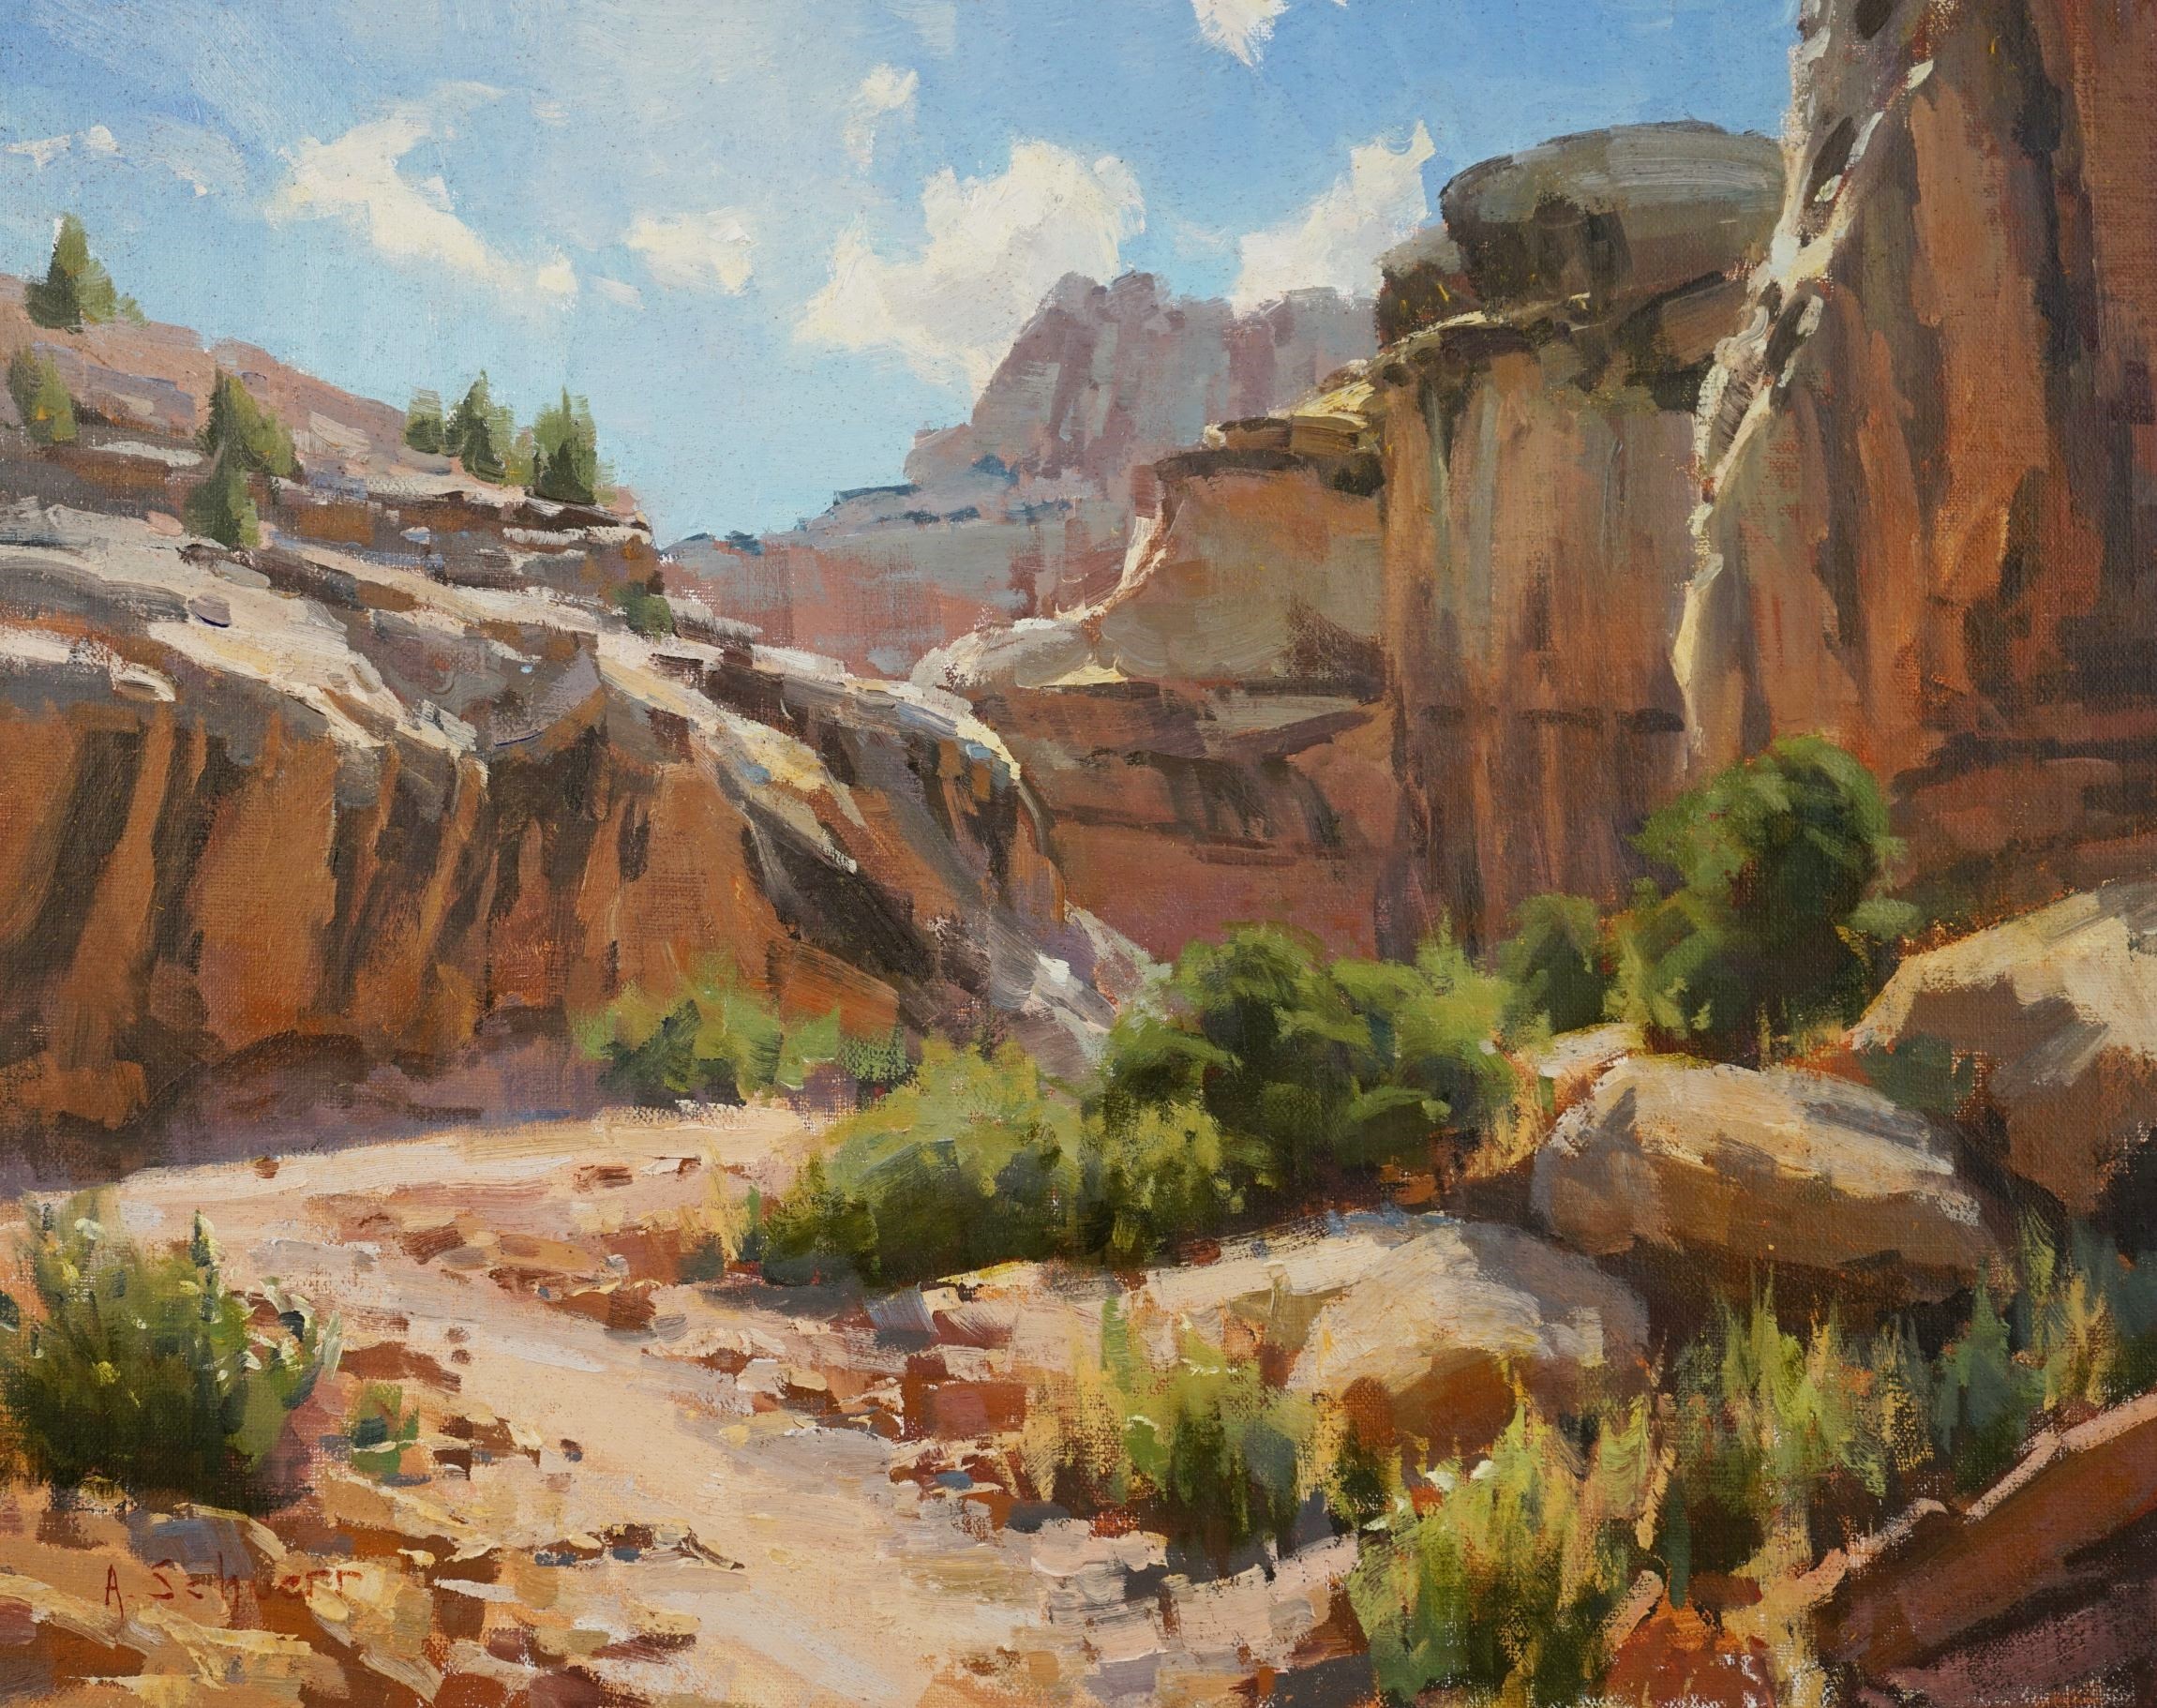 Aaron Schuerr AIS, "Grand Wash Capitol Reef," Oil, 11 x 14 in., $1,700